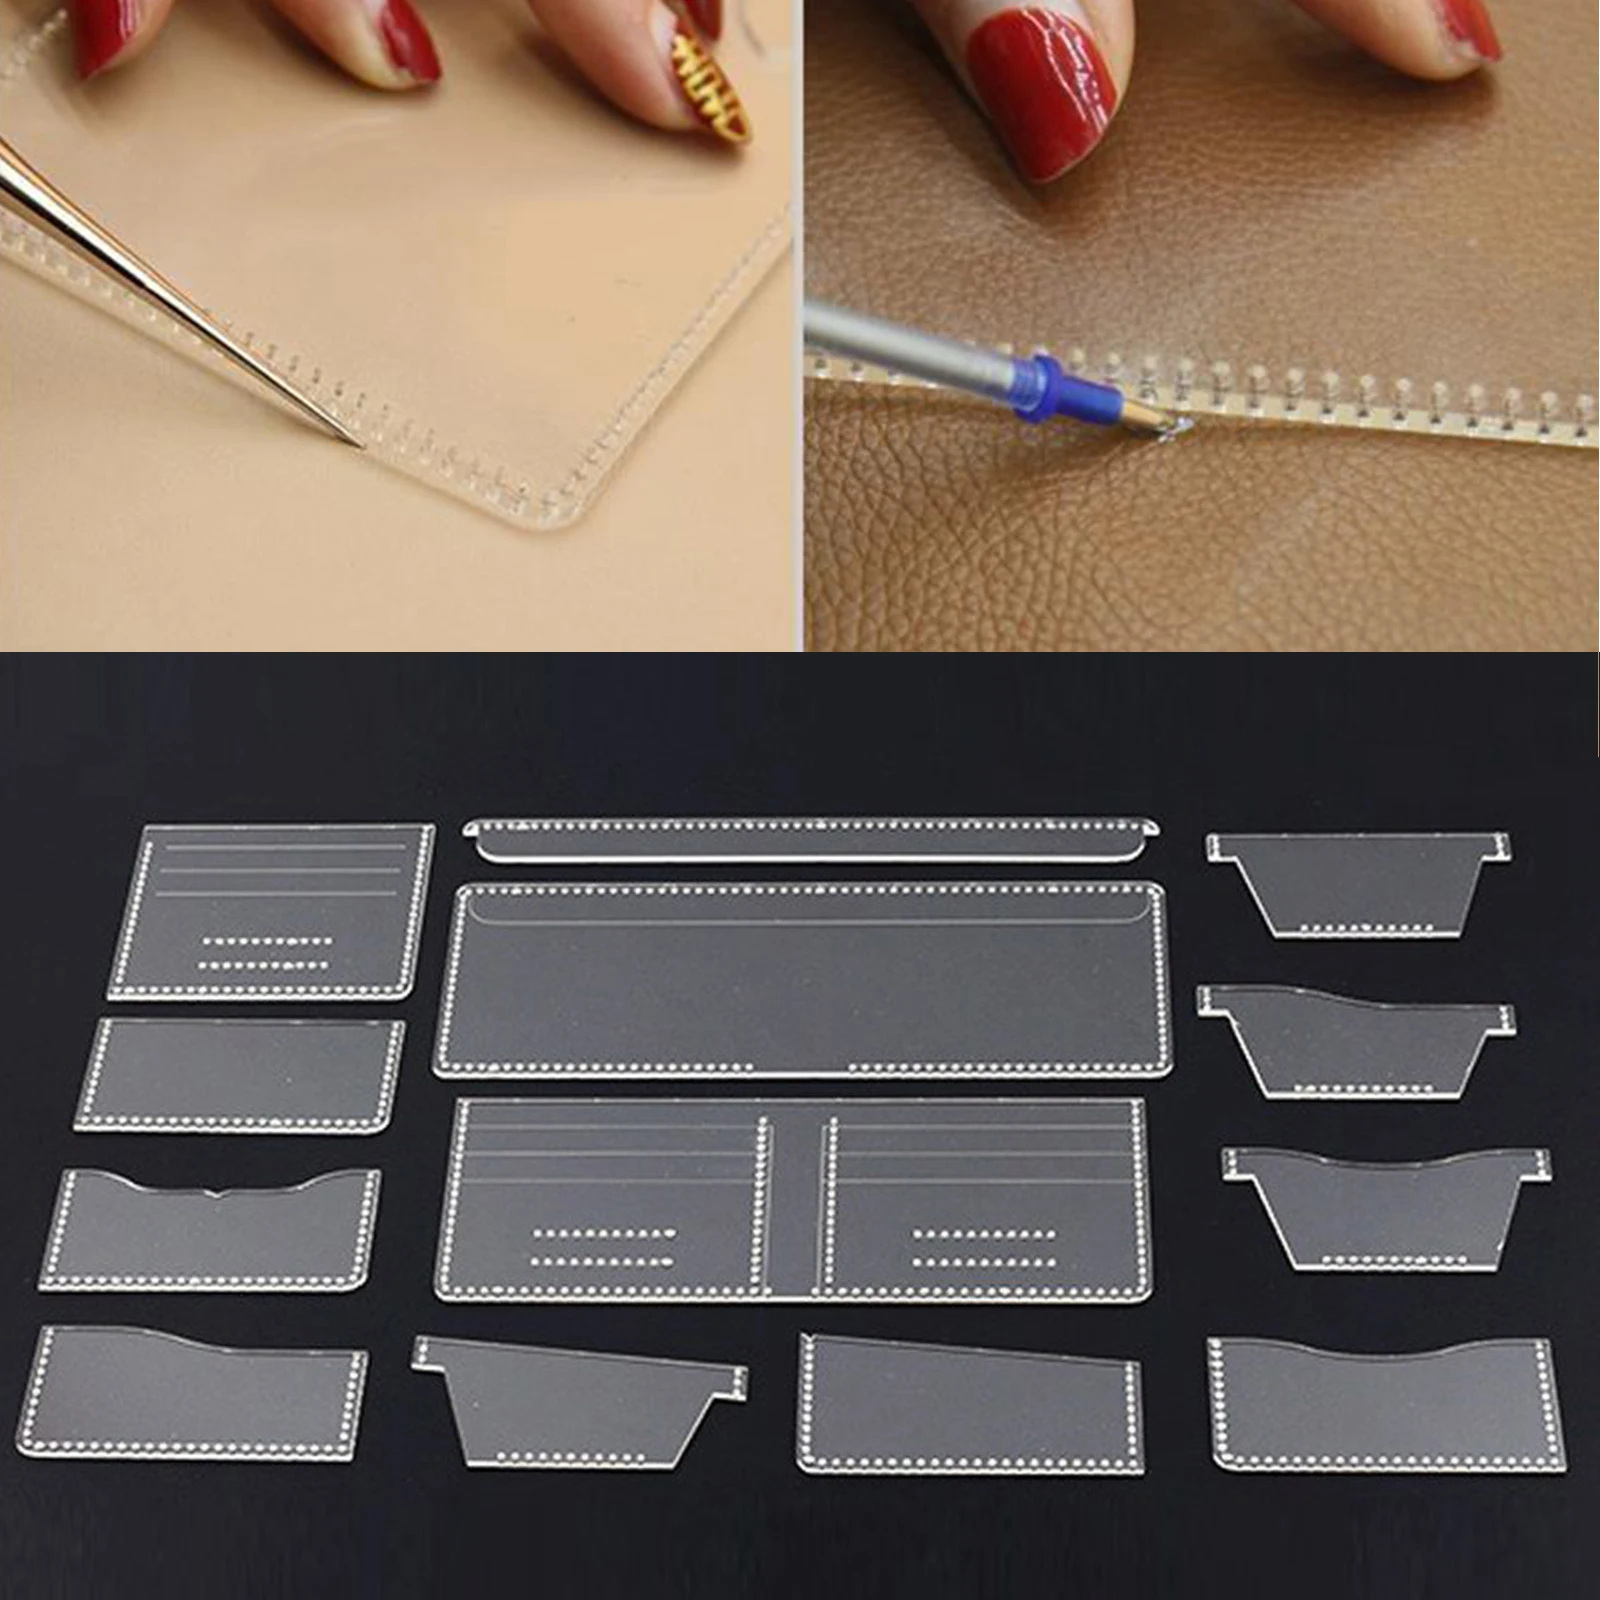 Acrylic Stencil 1set Clear Template Pattern Tool Wallet Card Holder Leather